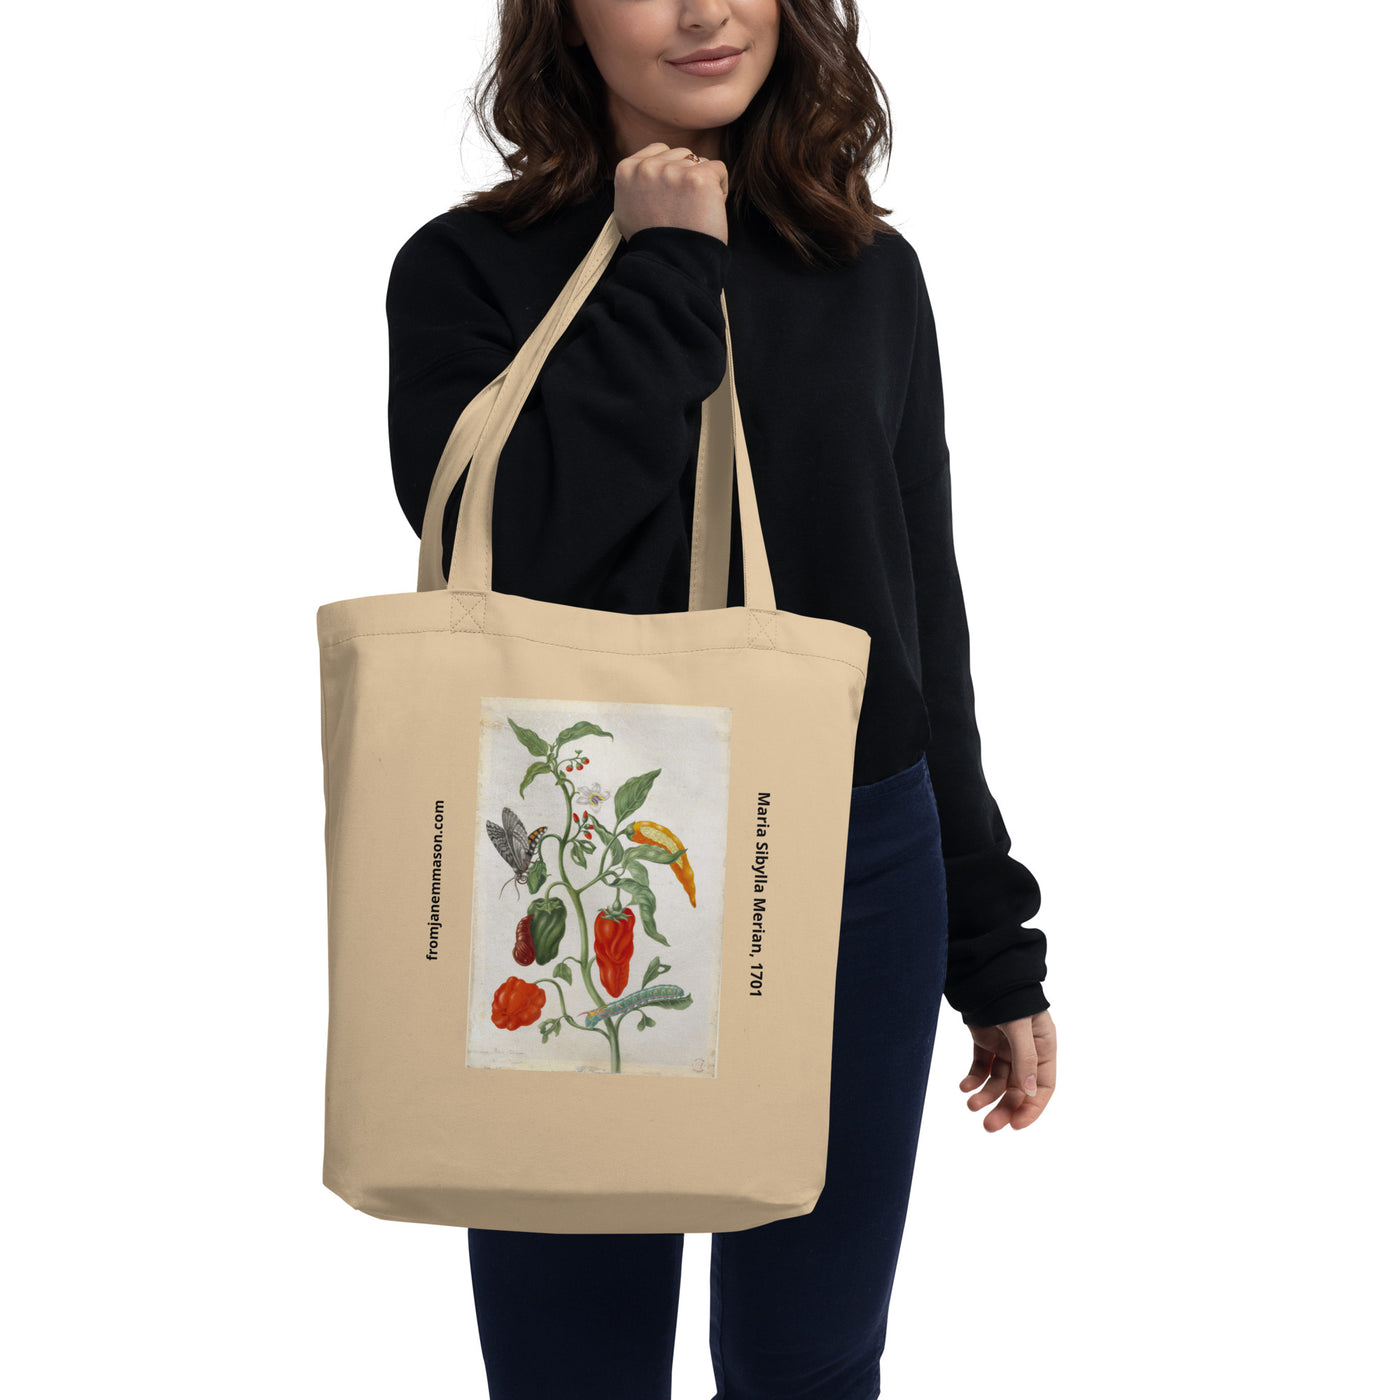 Eco tote bag with vegetable painting